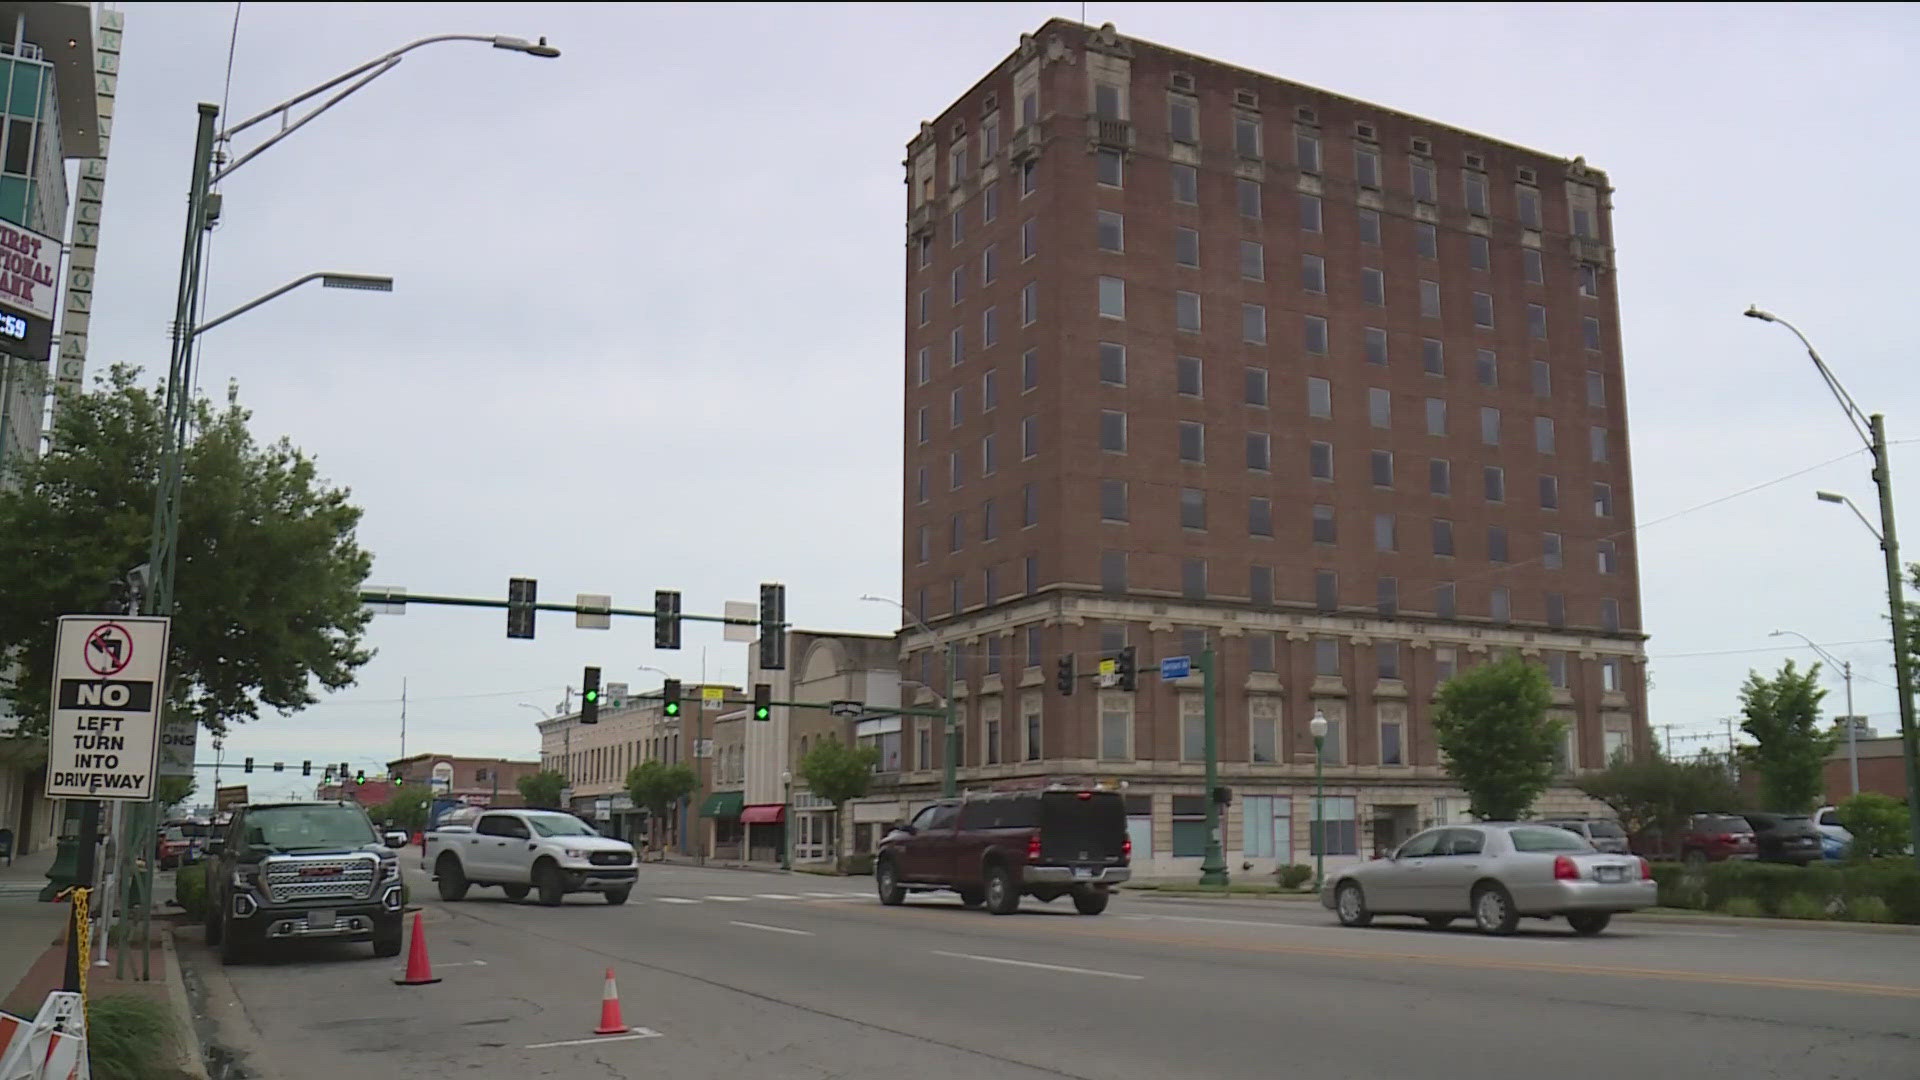 ONE OF DOWNTOWN FORT SMITH'S MOST HISTORIC LANDMARKS WILL GO ON THE AUCTION BLOCK...